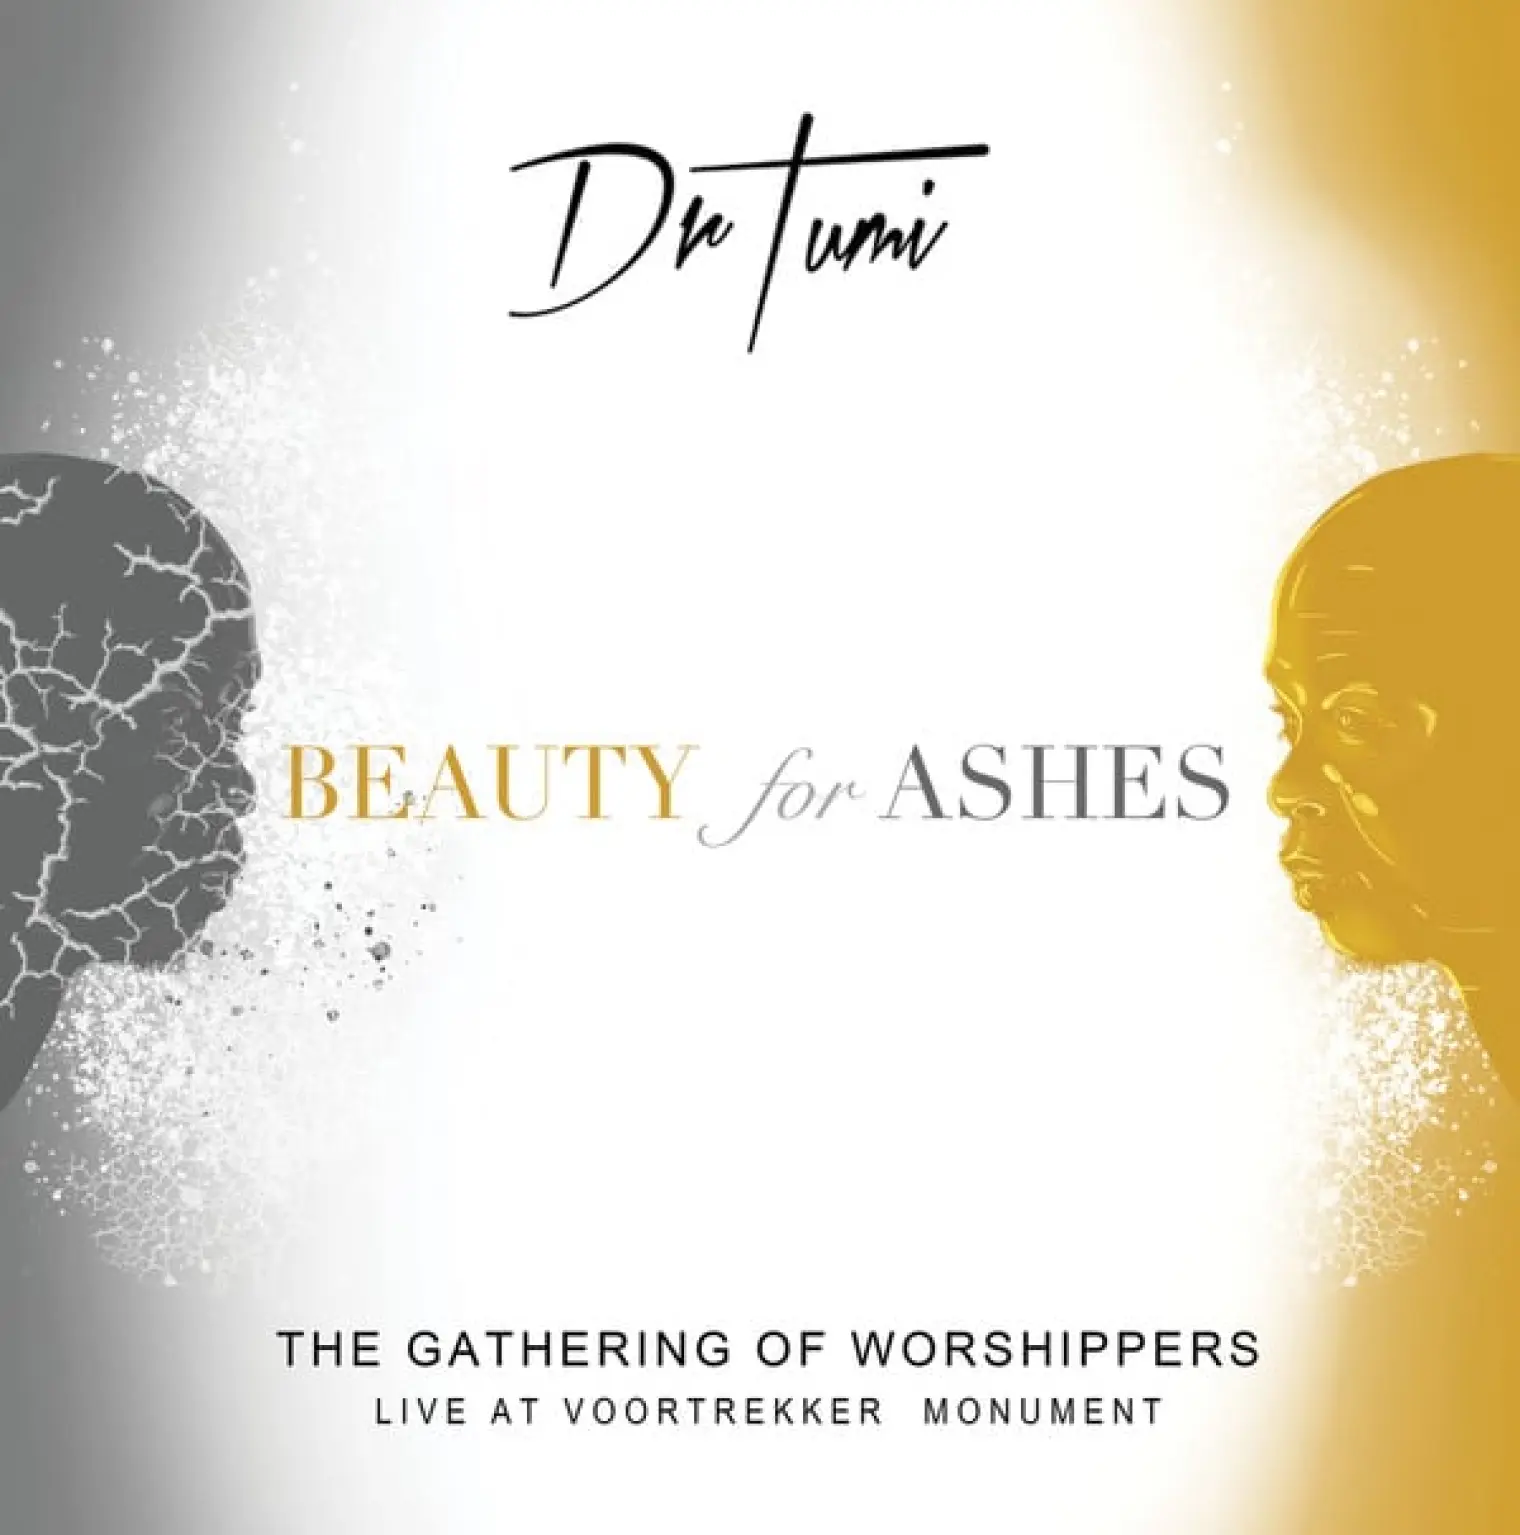 The Gathering Of Worshippers - Beauty For Ashes -  Dr Tumi 